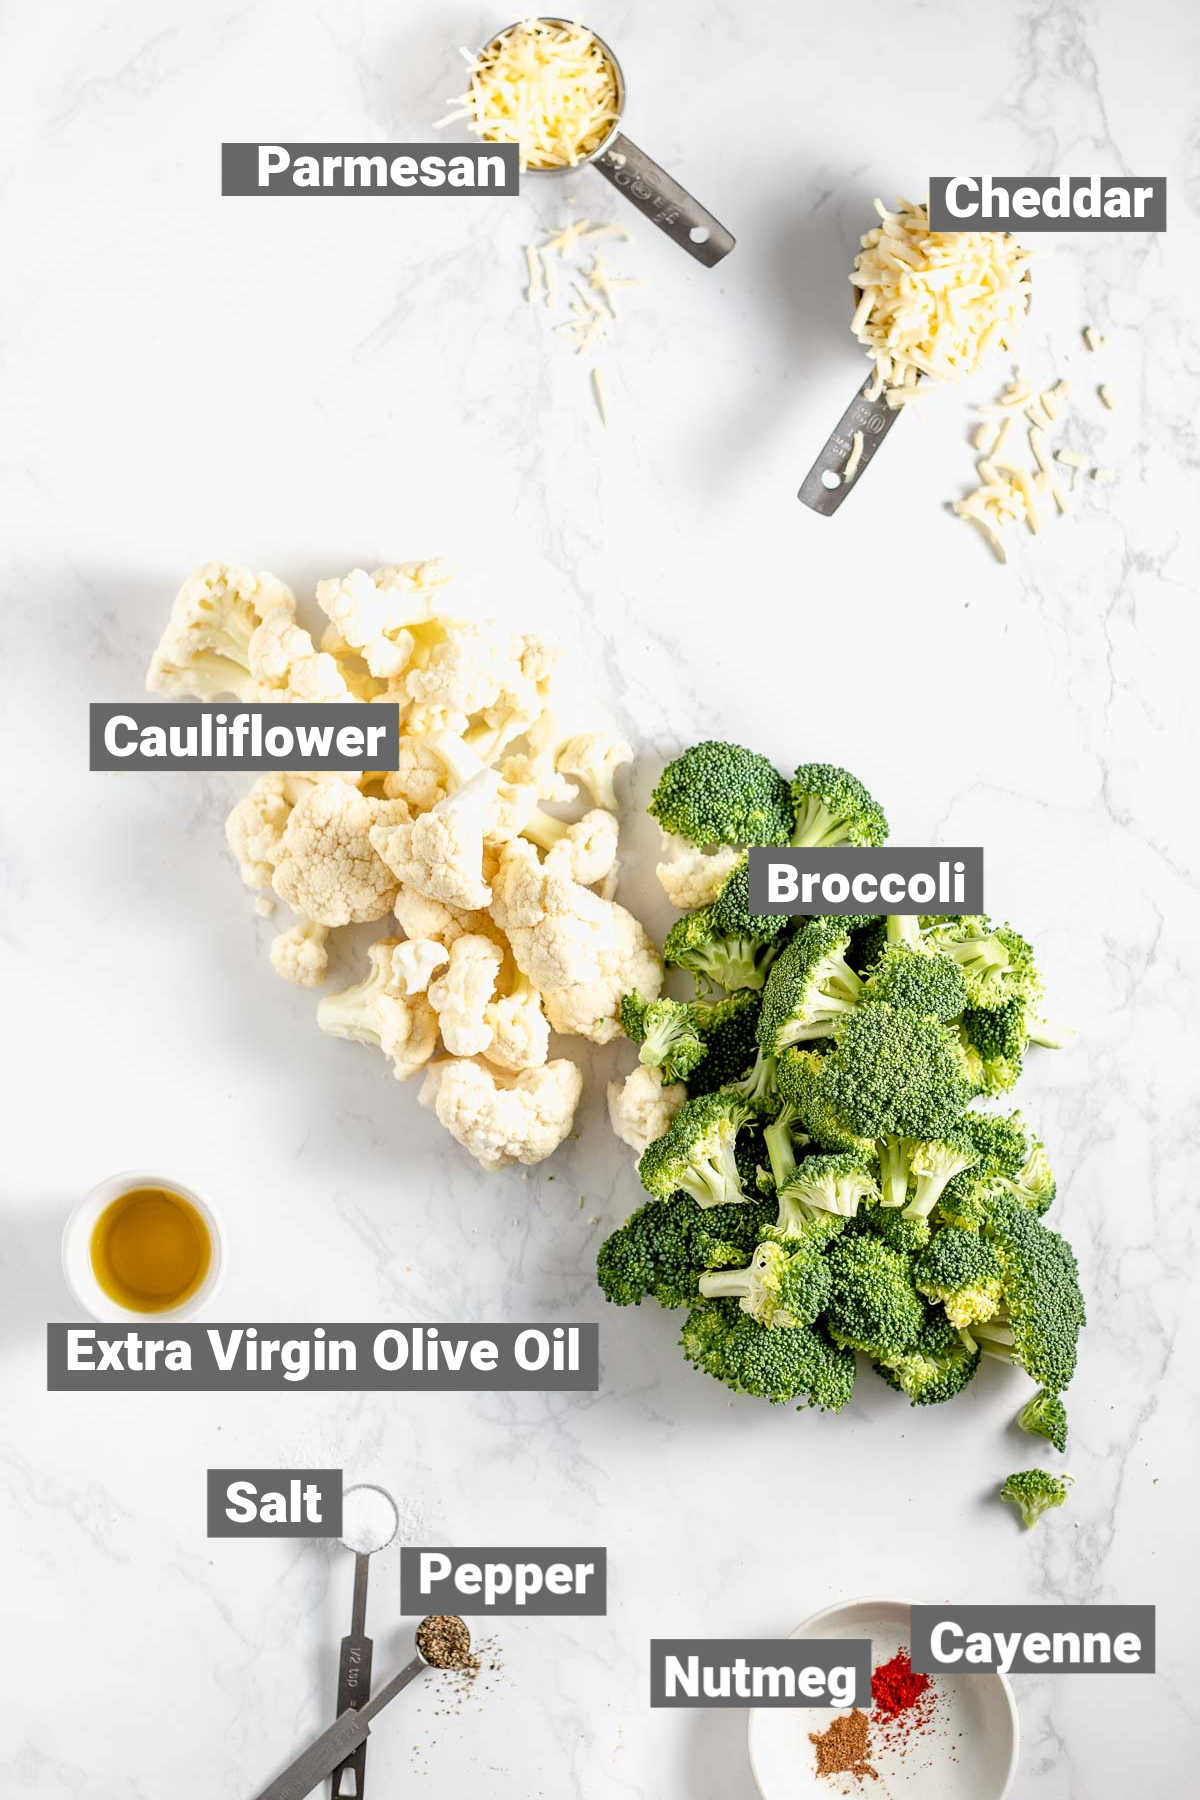 Roasted broccoli and cauliflower with cheese ingredients